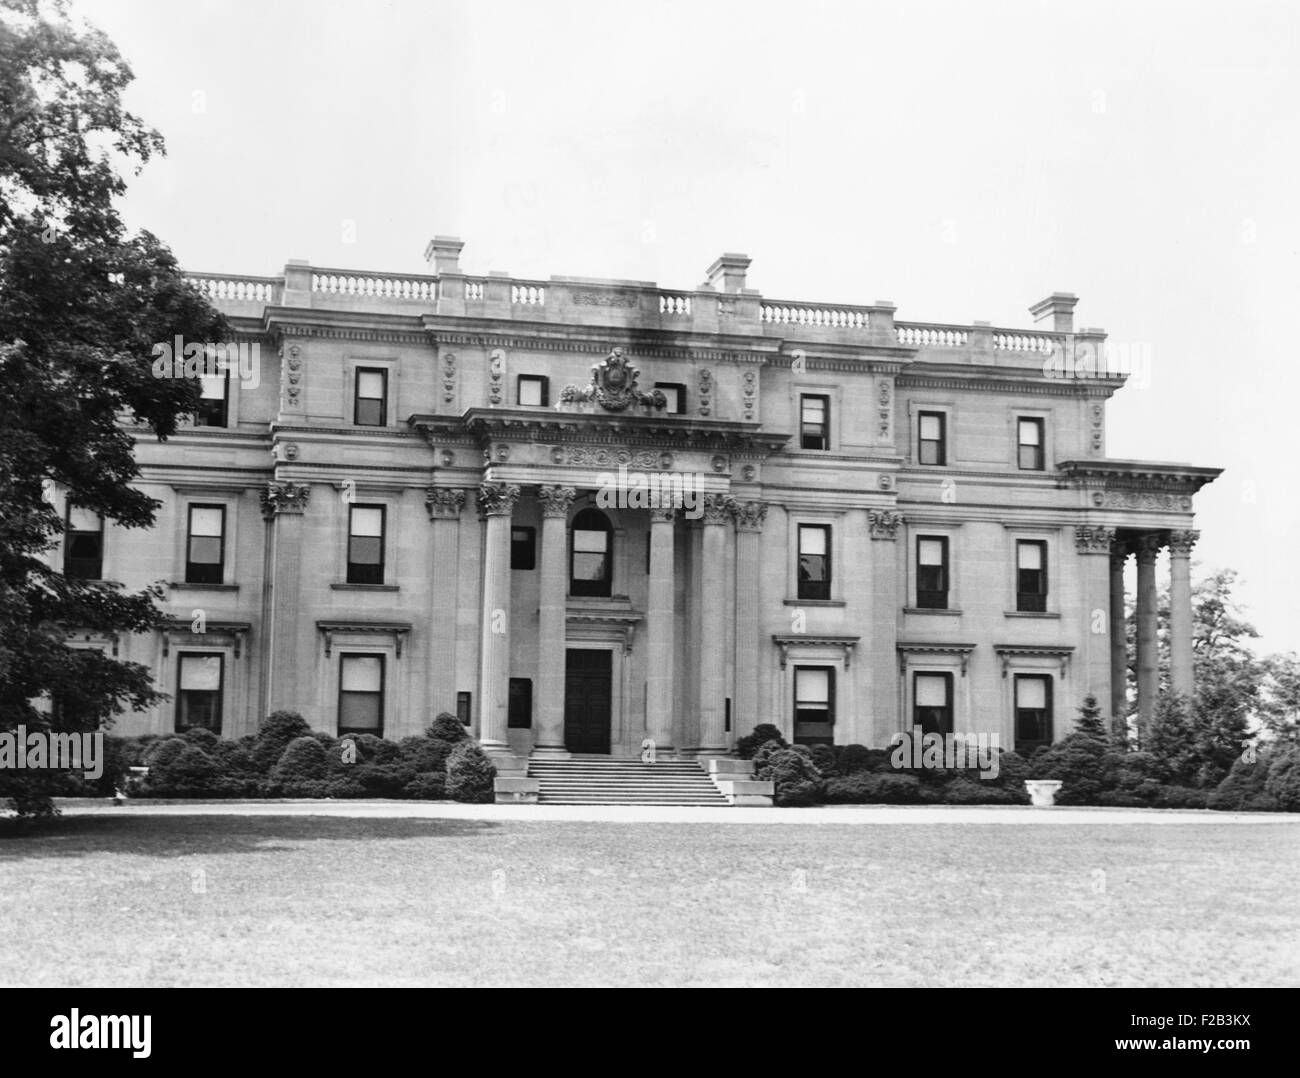 Grecian-Corinthian Mansion on the 700-acre Vanderbilt estate at Hyde Park, N.Y. A rumor circulated that African American cult leader Father Divine was purchasing the property near FDR's home. President Roosevelt addressed a communication to Father Divine stating that it was anybody's privilege to buy any property on sale. Aug, 16, 1939. - (CSU 2015 5 76) Stock Photo